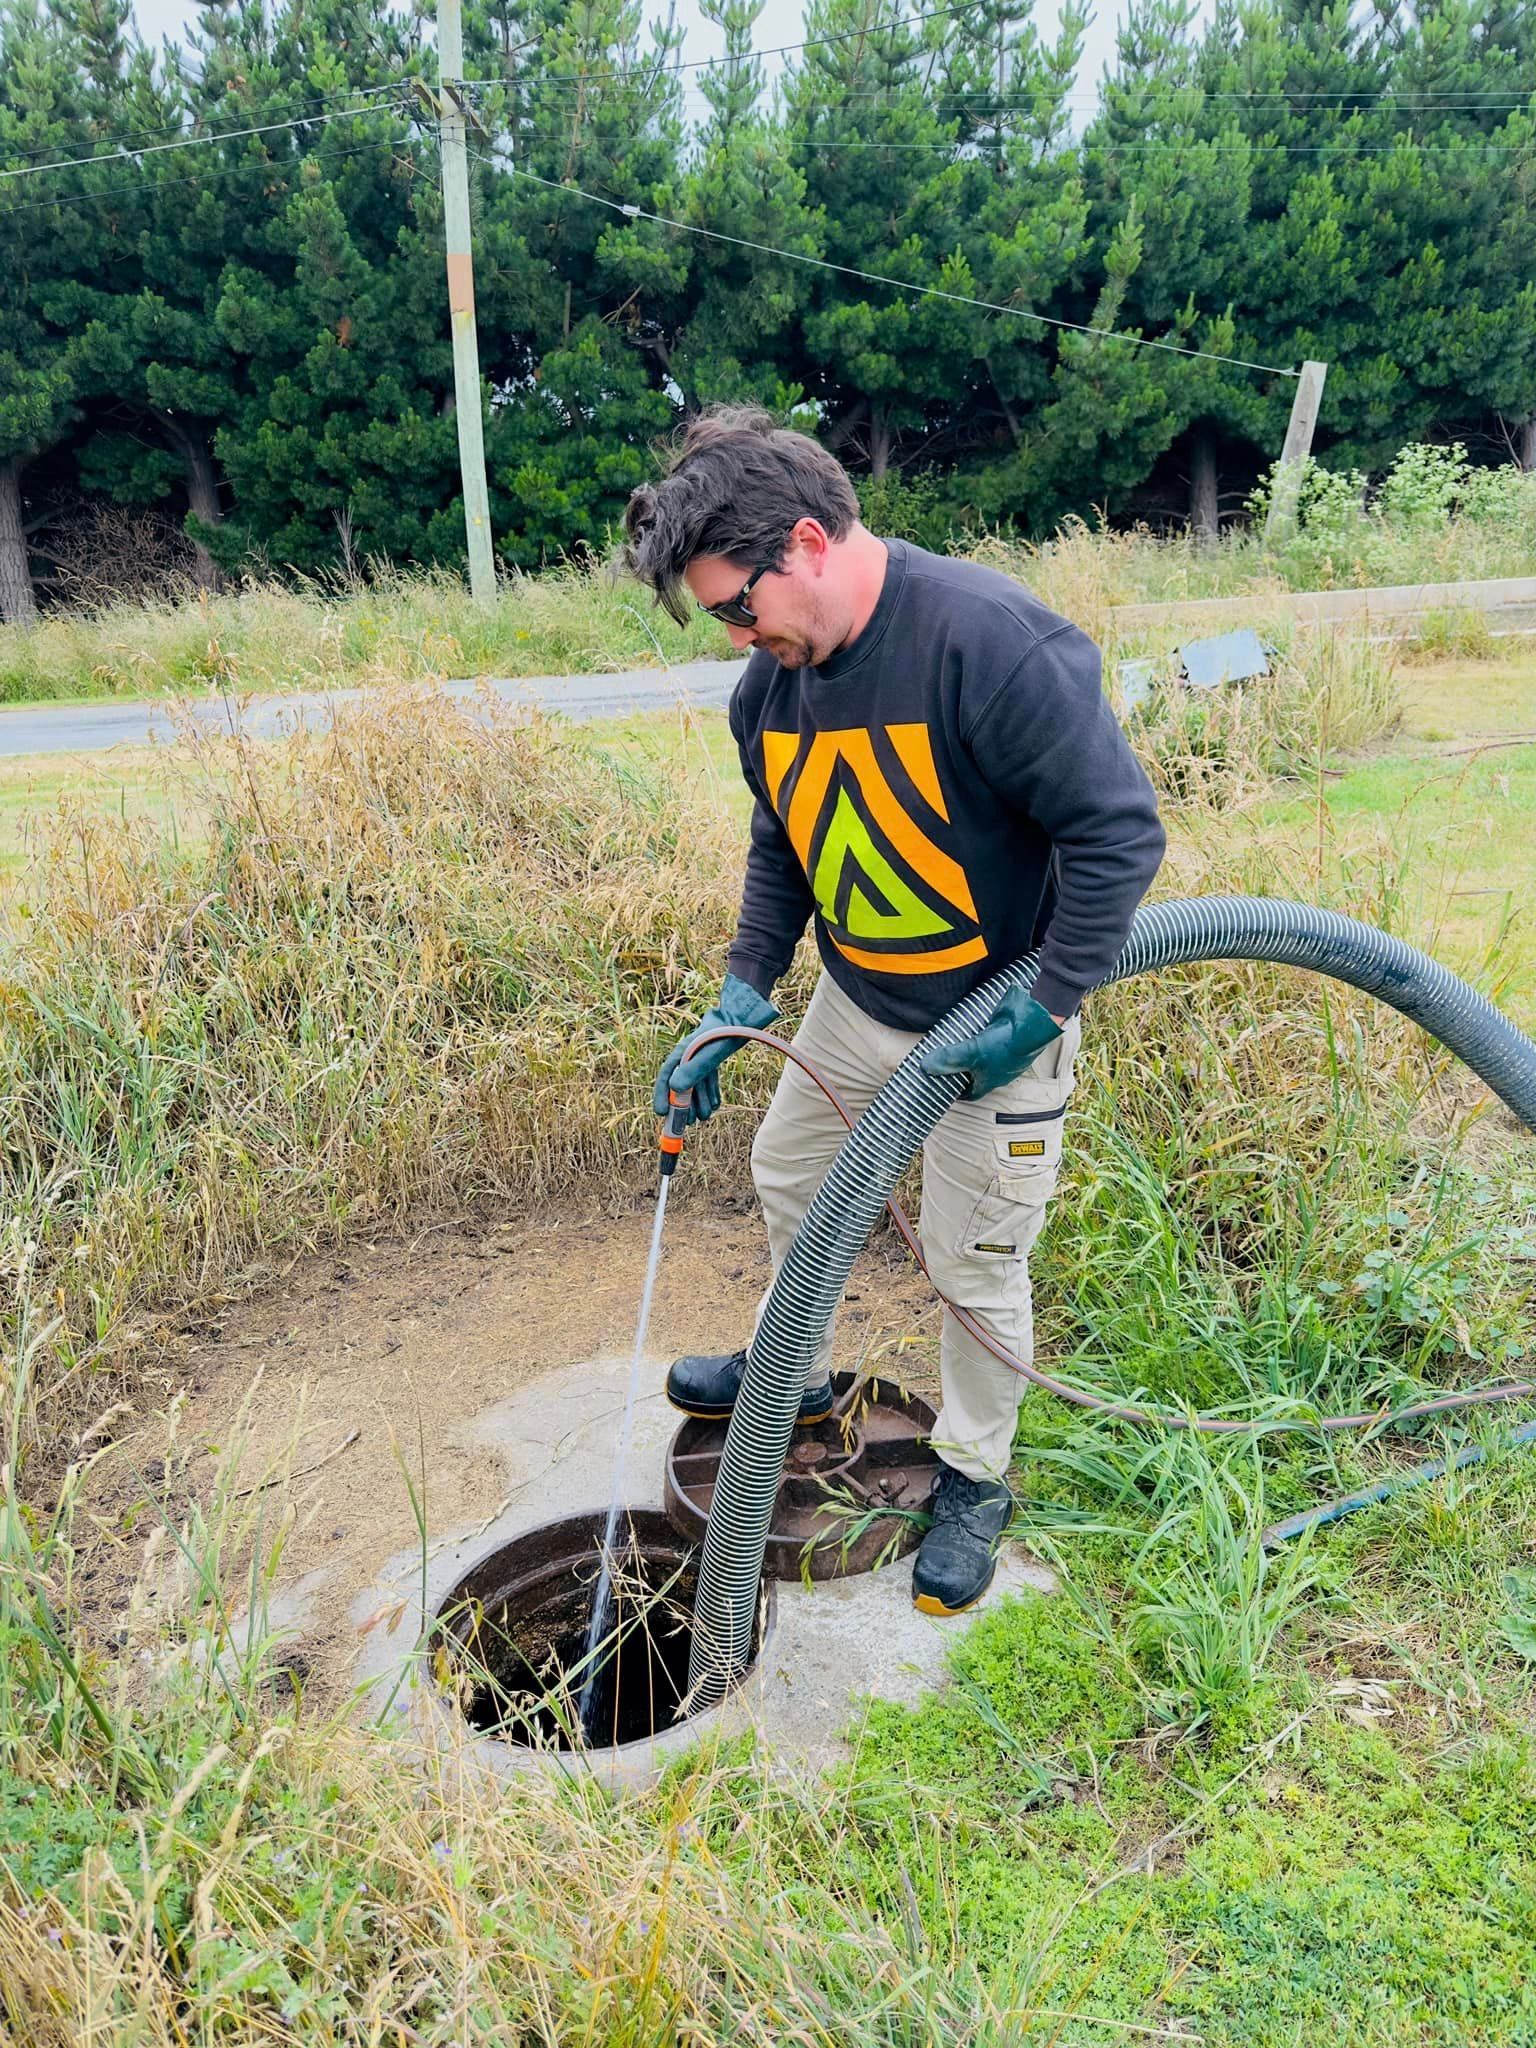 a man is pumping water into a manhole cover with a hose .